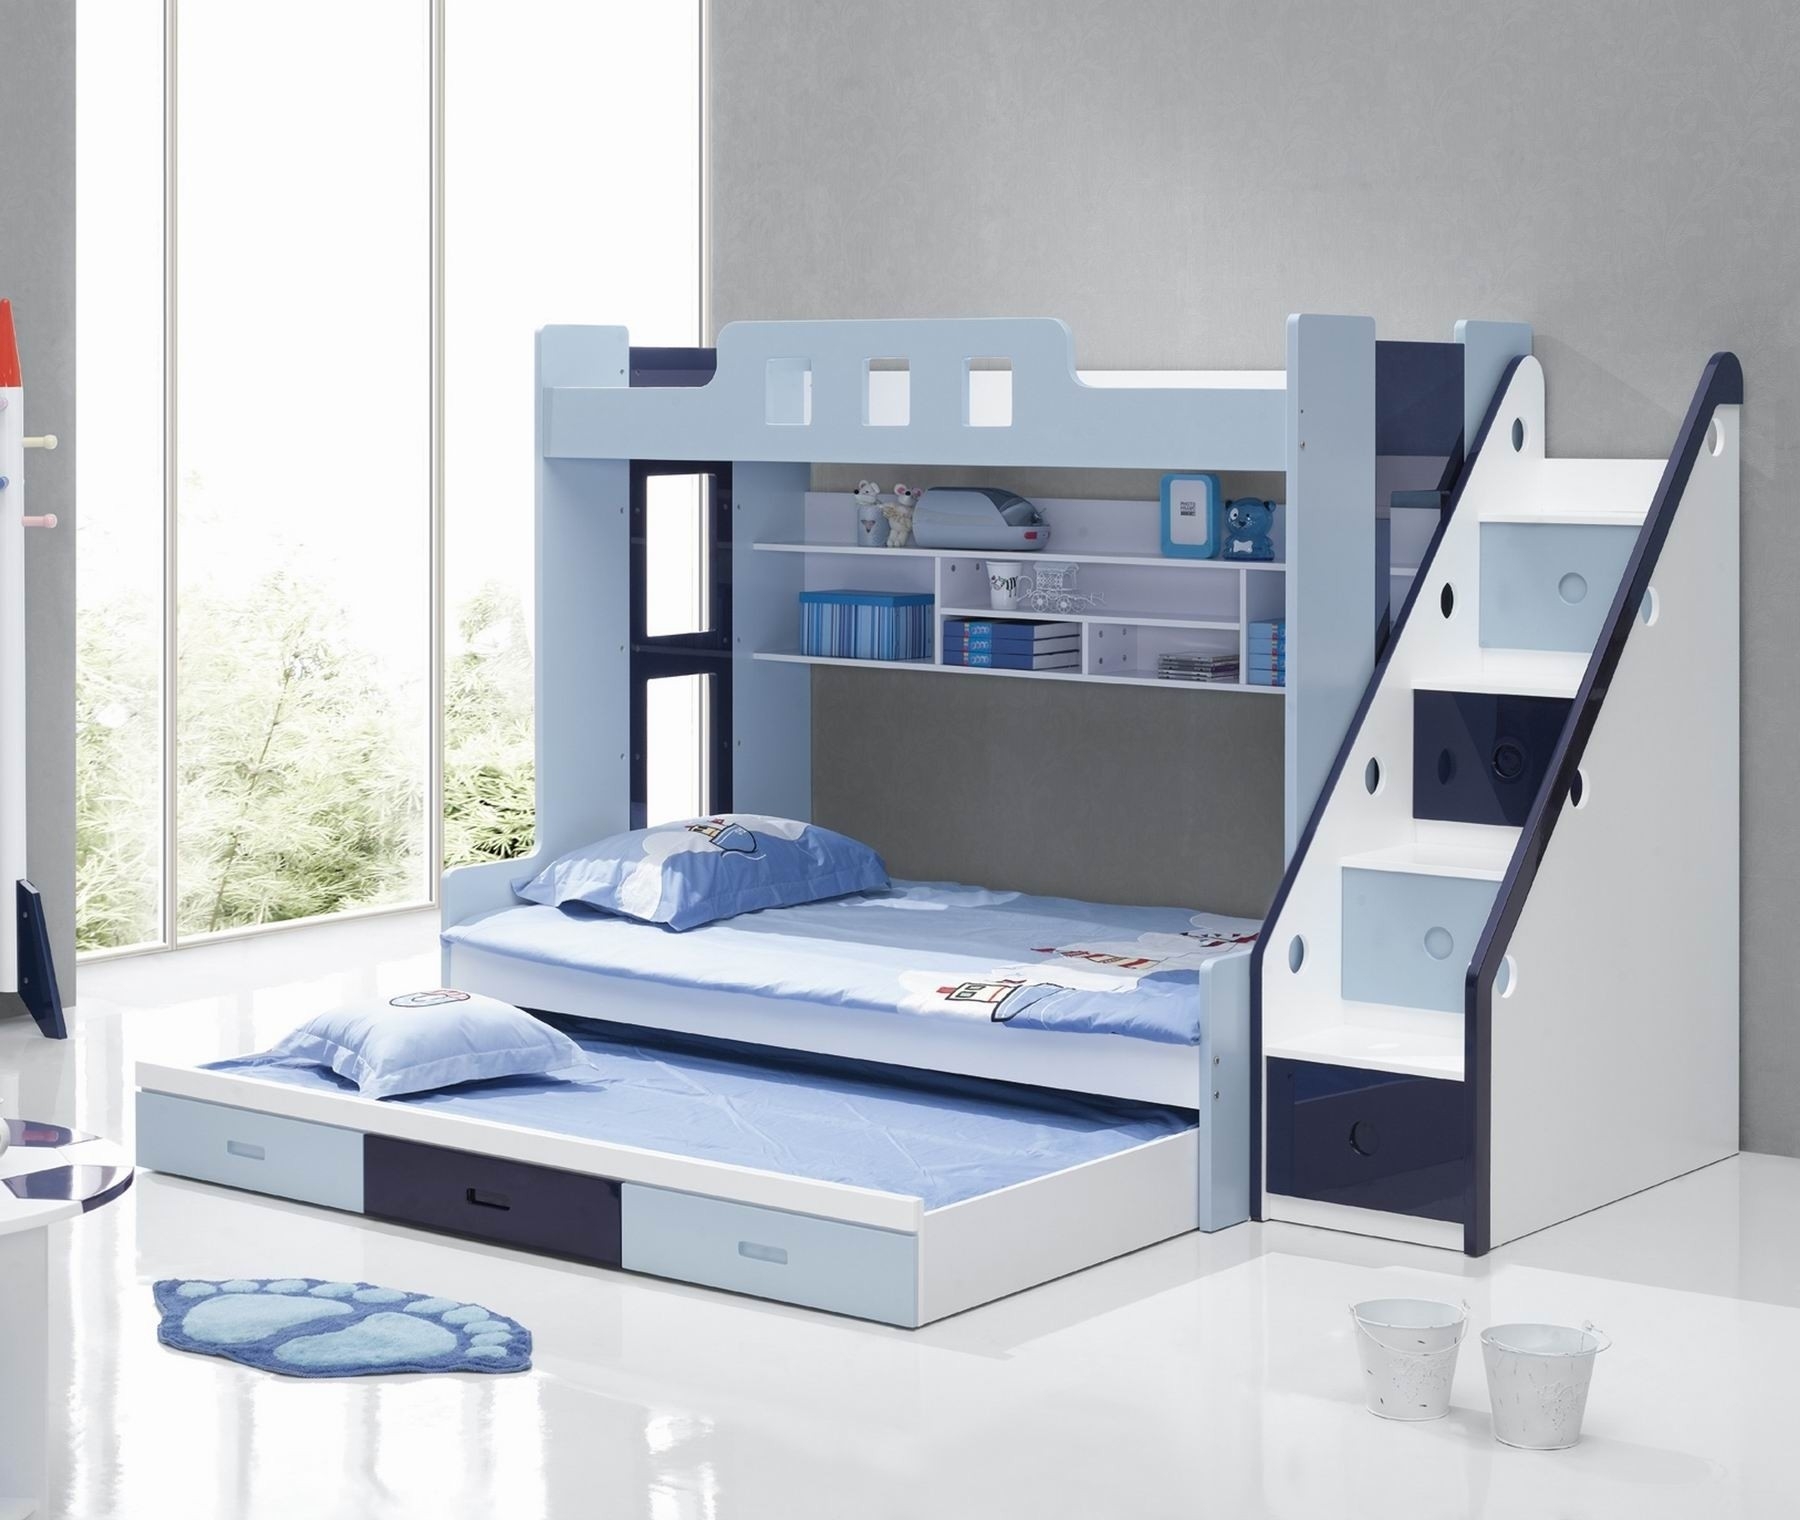 captain bunk beds with drawers